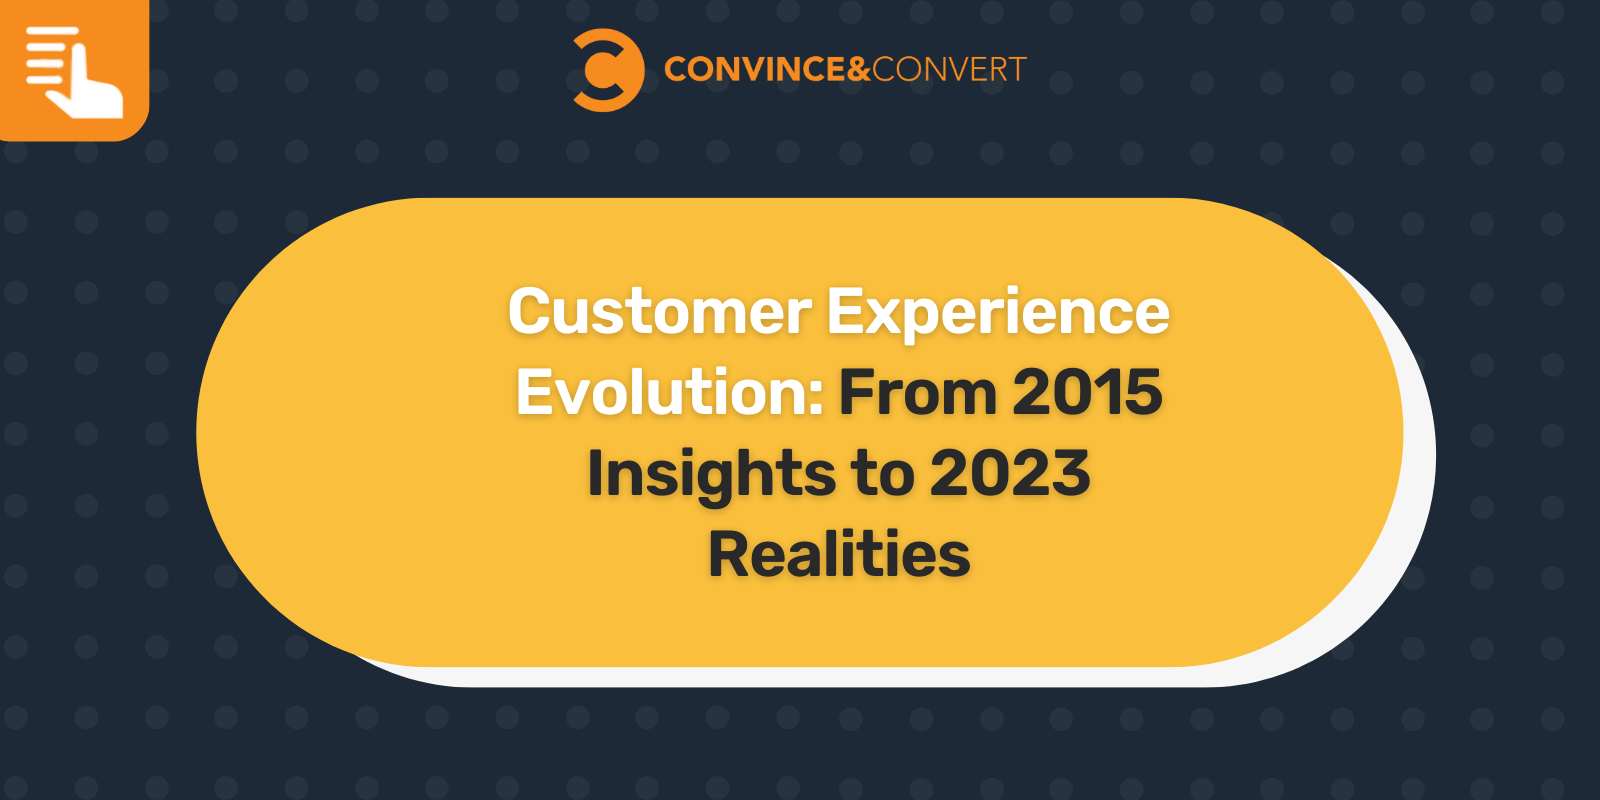 Customer Experience Evolution From 2015 Insights to 2023 Realities